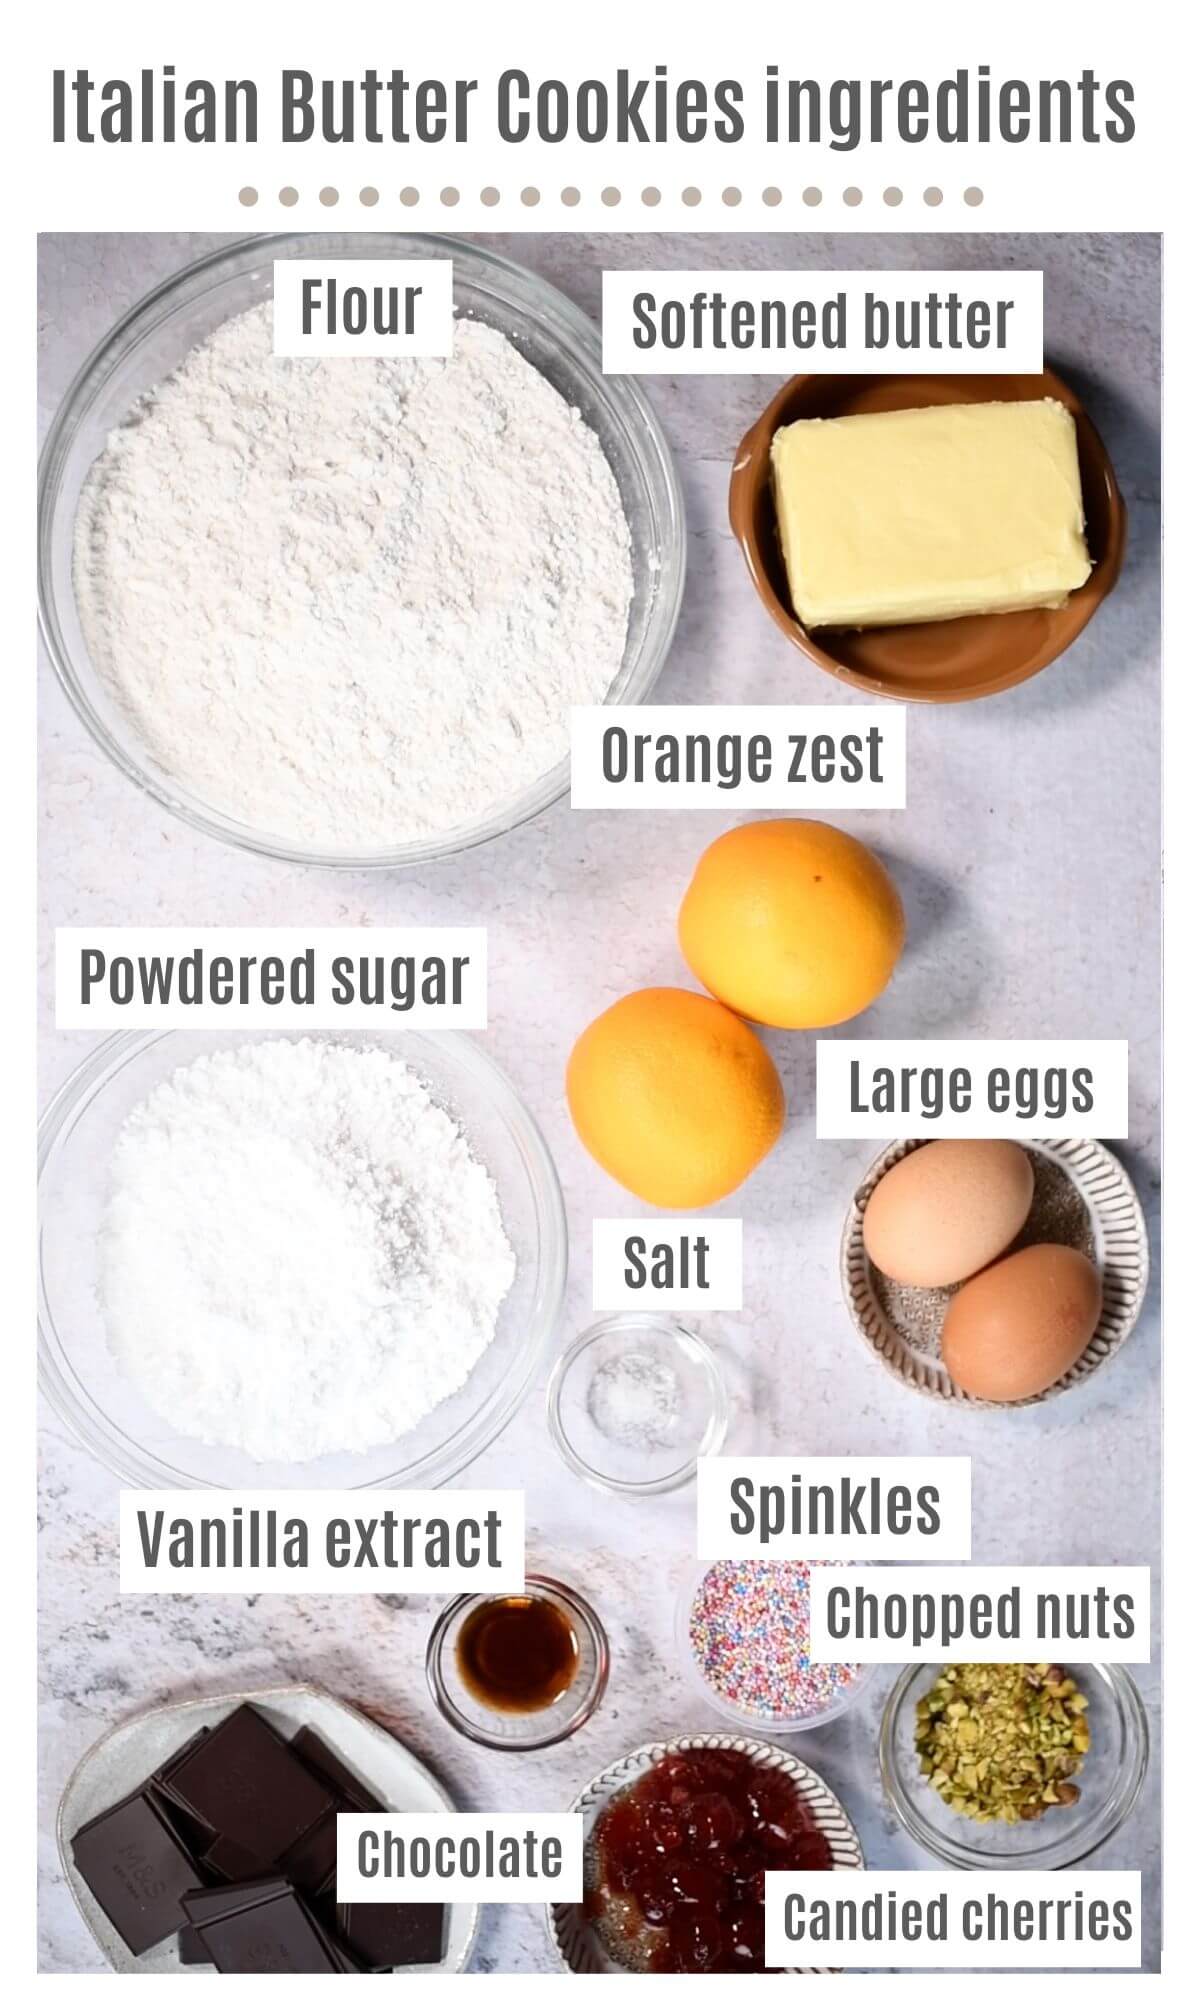 An overhead shot showing ingredients needed to make and decorate Italian butter cookies.